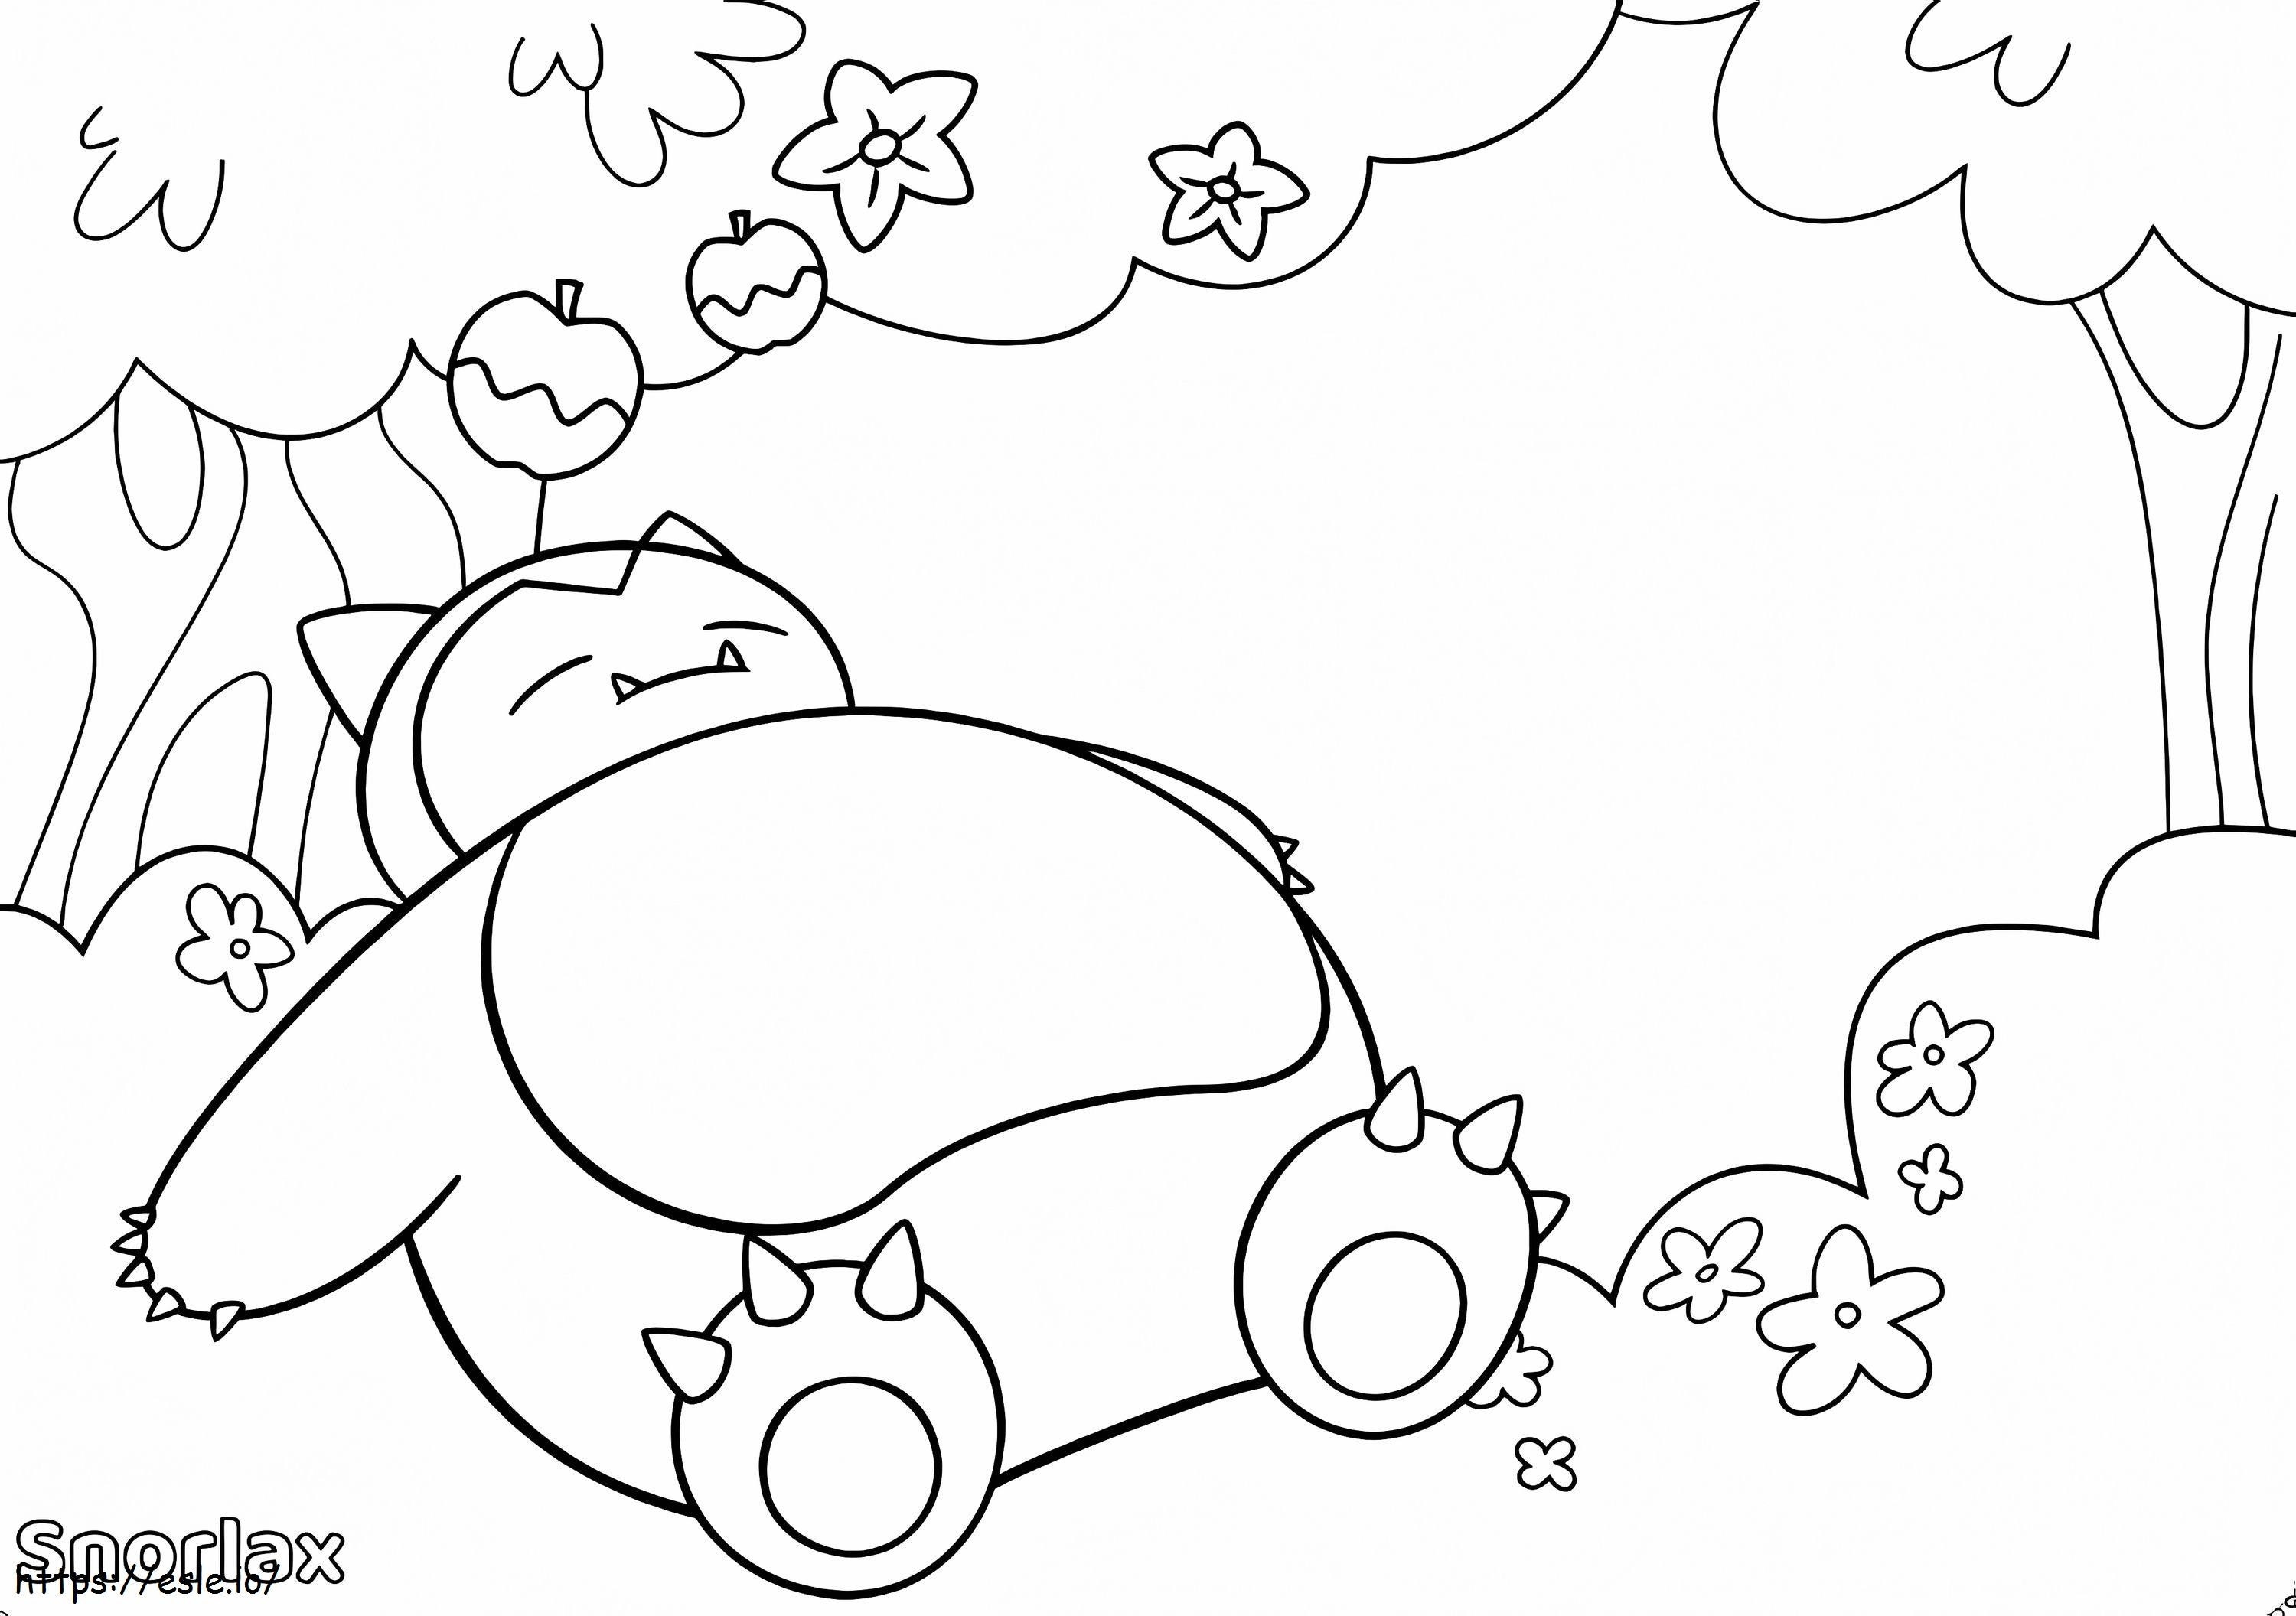 Snorlax Is Sleeping coloring page